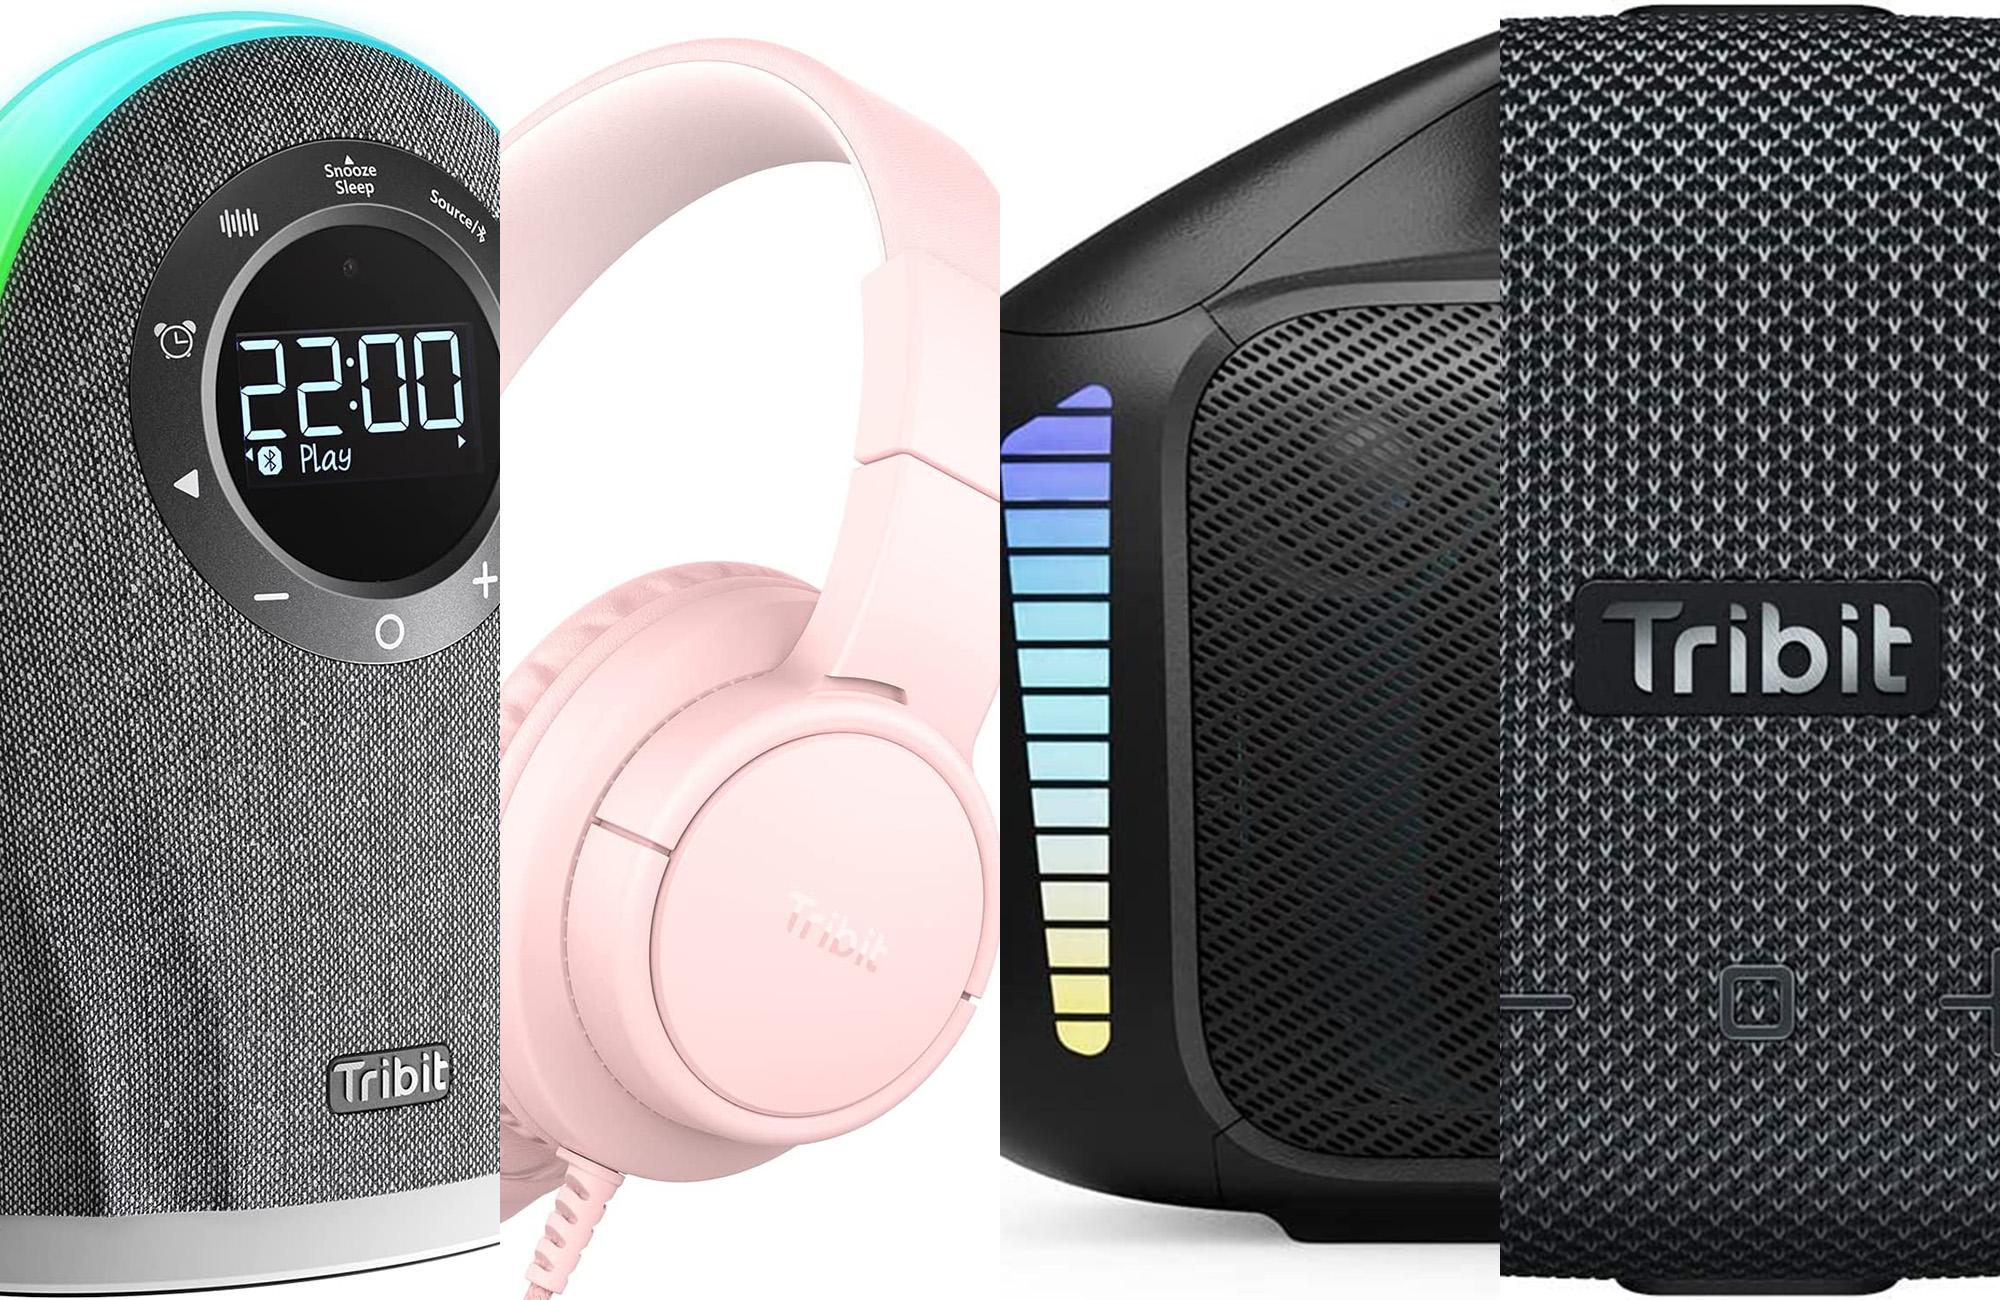 Listen up! Tribit audio is up to 50% off on Amazon for a limited time